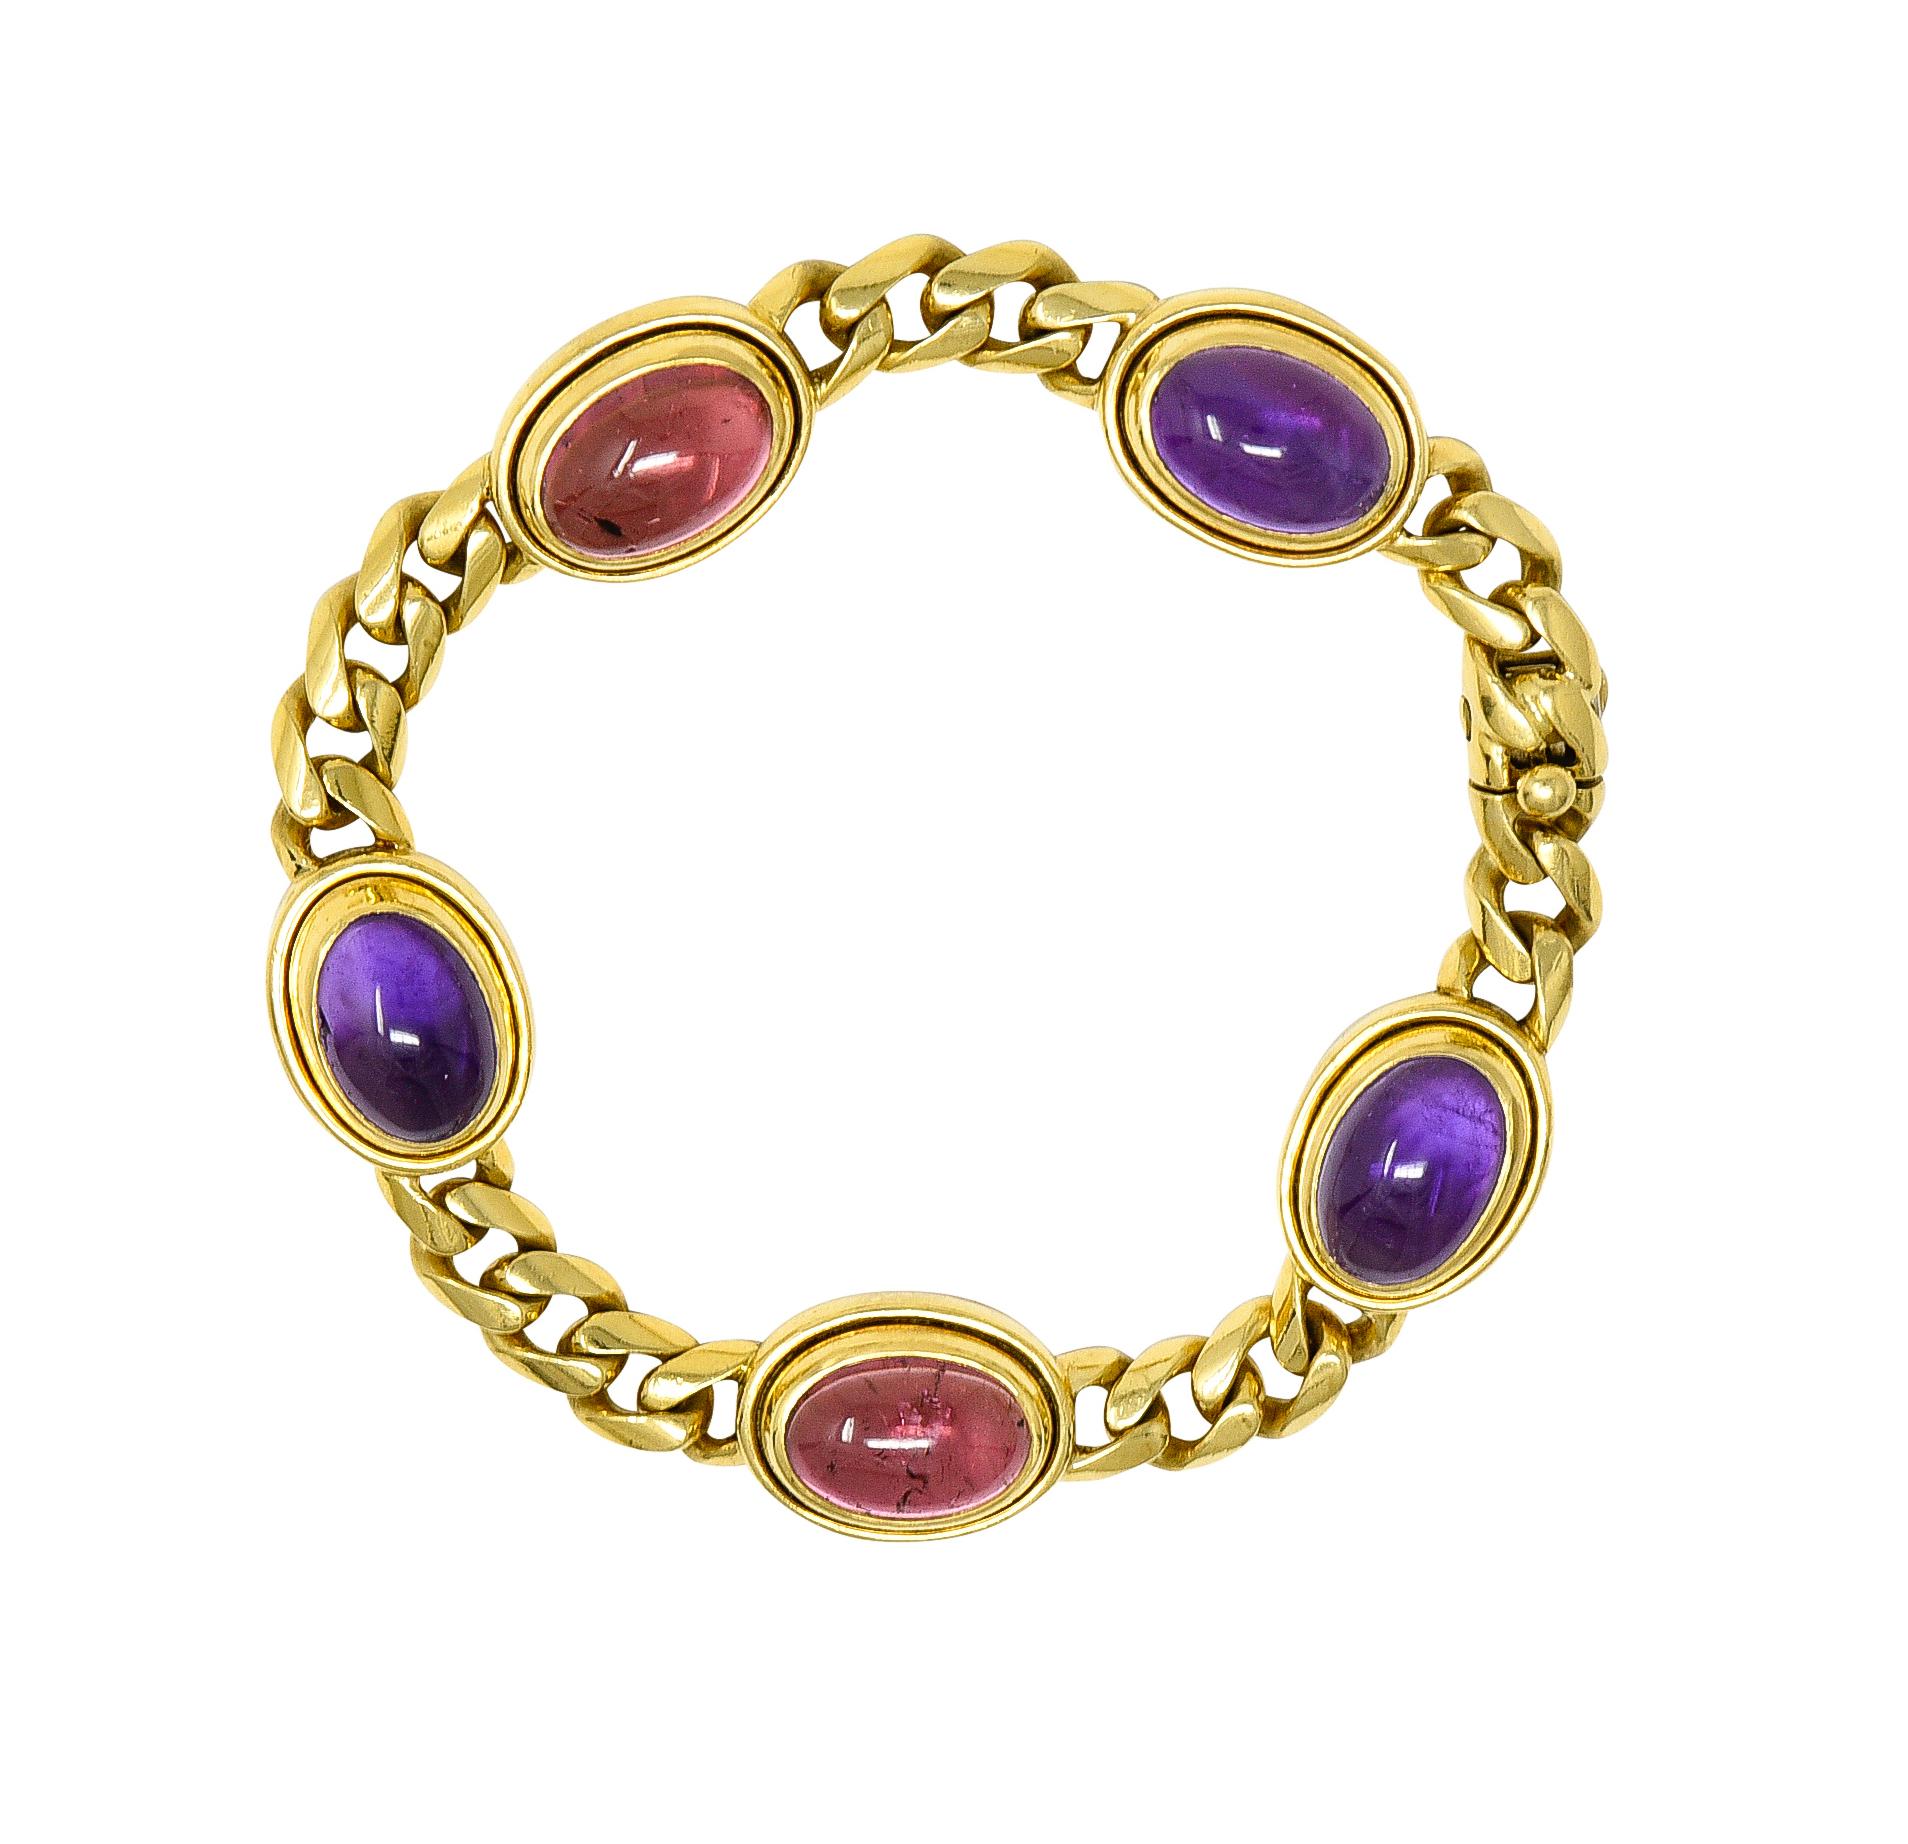 Designed as a curb link chain alternating with bezel set gemstone stations
Set with oval-shaped amethyst and tourmaline cabochons measuring 8.0 x 12.0 mm
Transparent medium purple and medium pink in color, respectively
Completed by concealed clasp